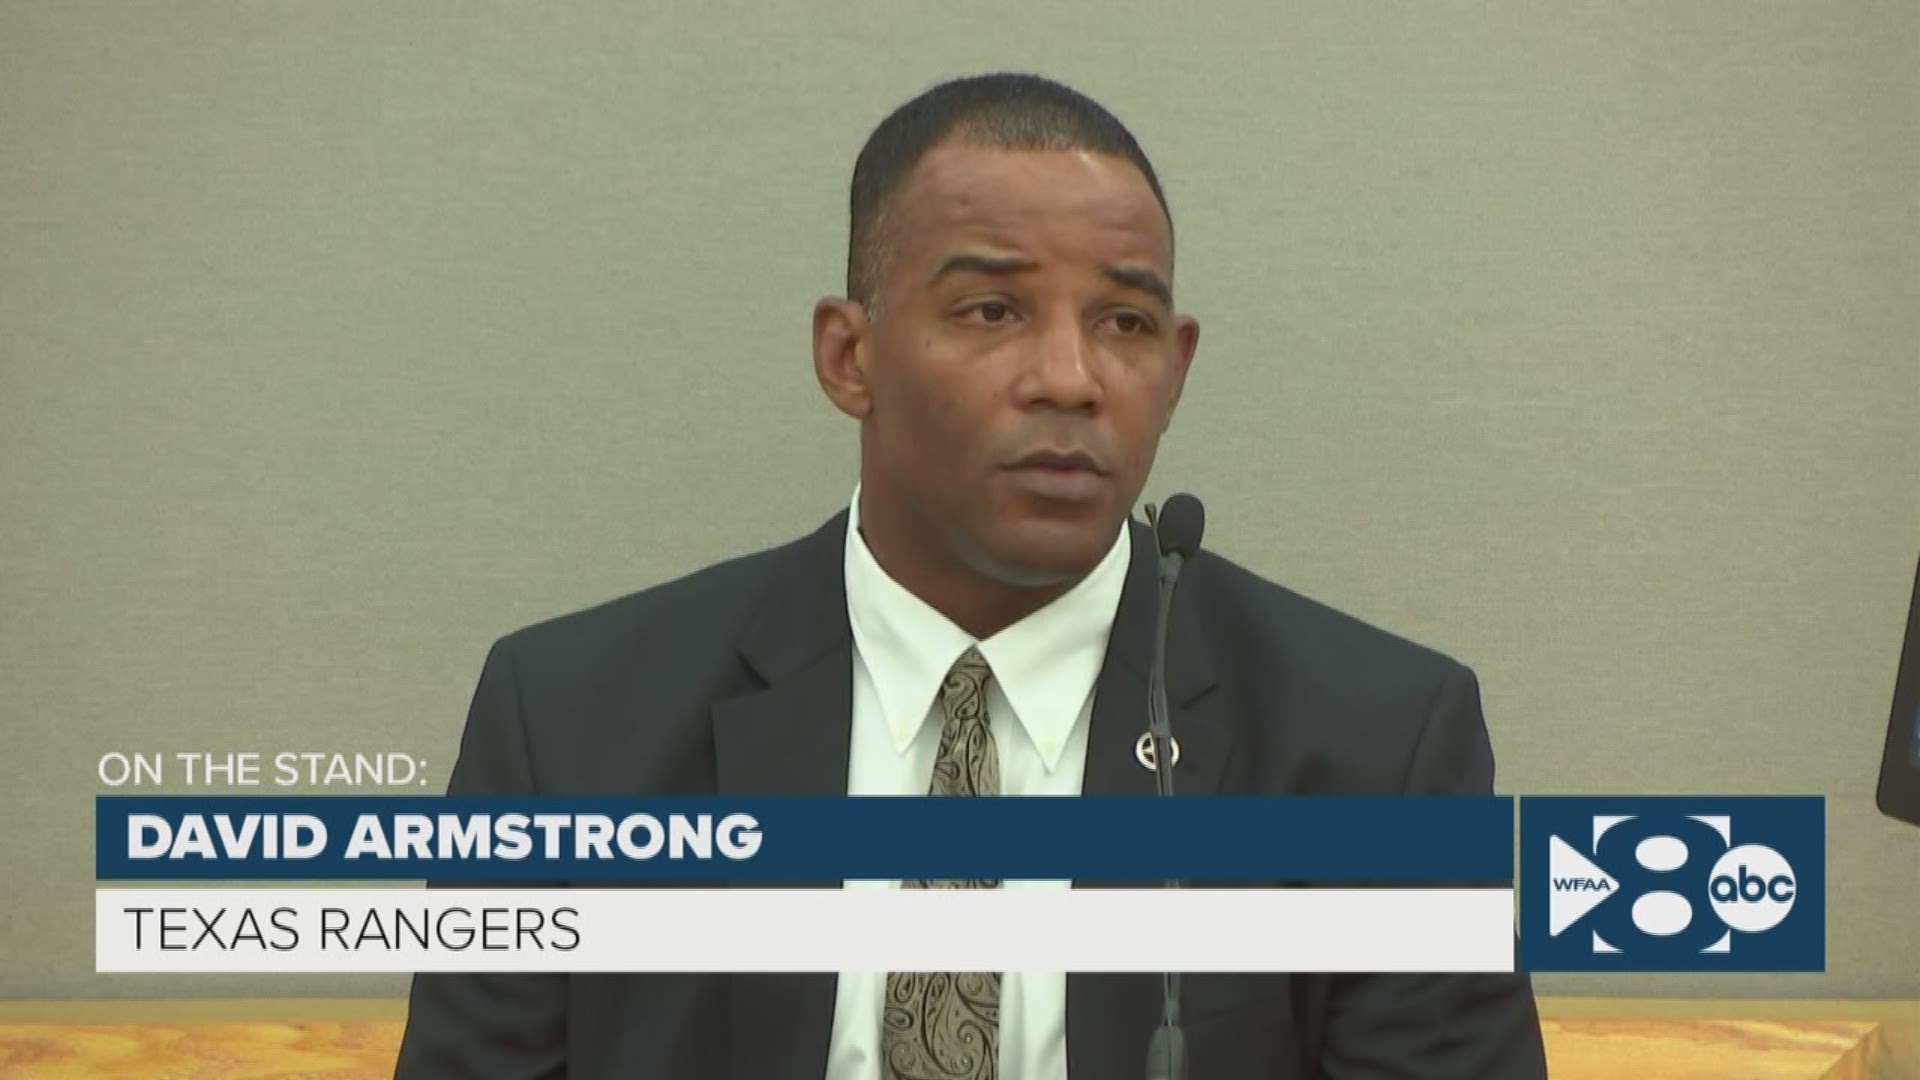 Texas Ranger David Armstrong said he doesn’t believe Guyger committed any crime. But jurors won’t get to hear that.